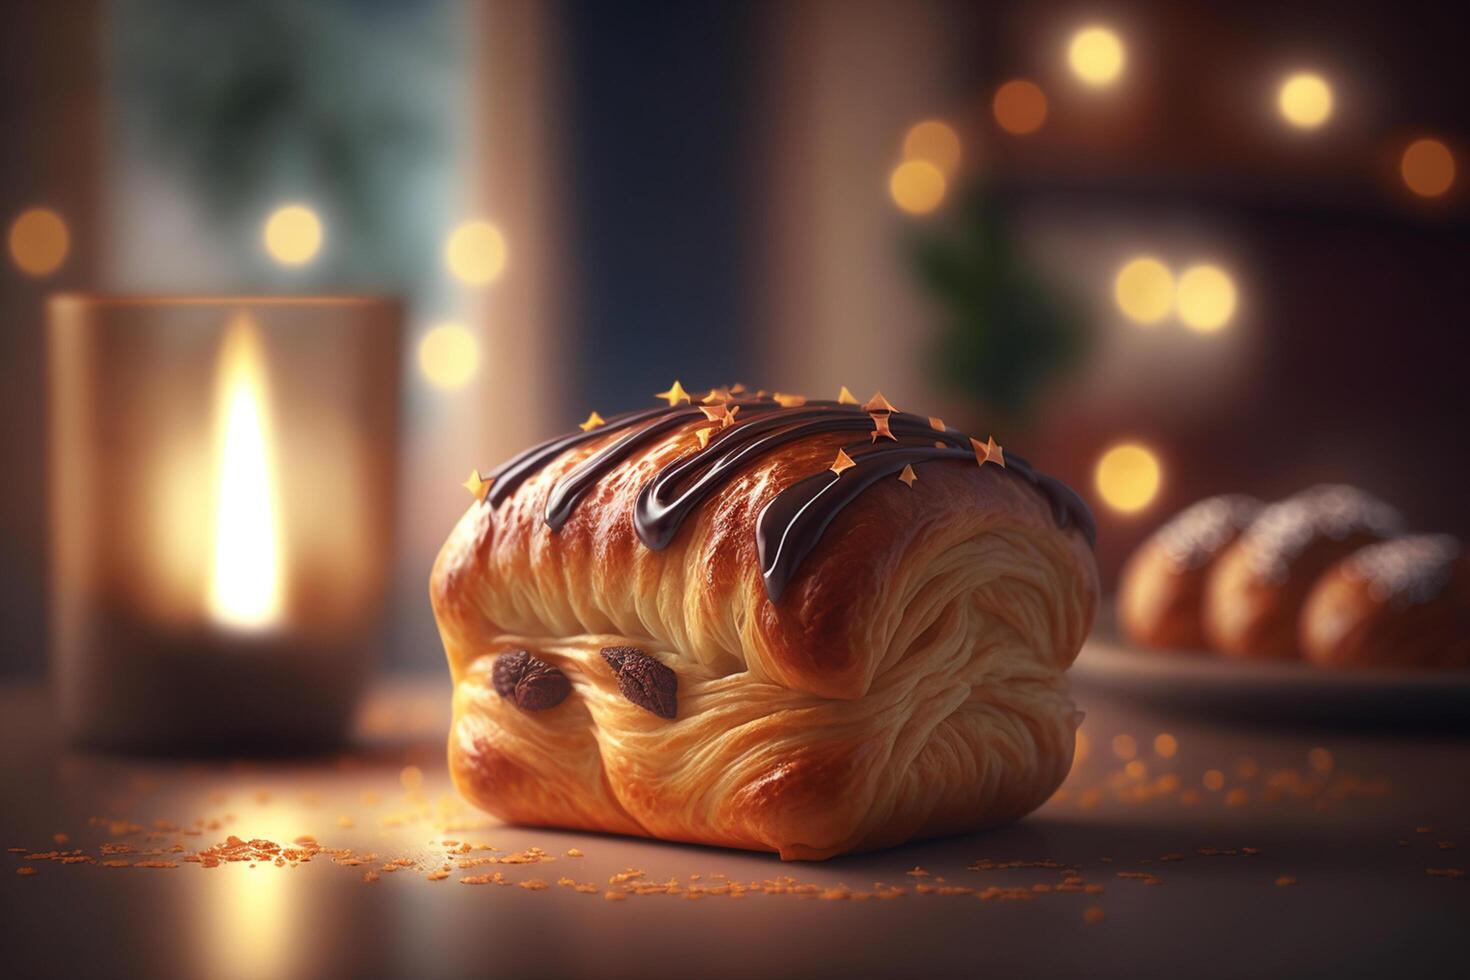 Delicious French Pain au Chocolat with a chocolate surprise inside photo